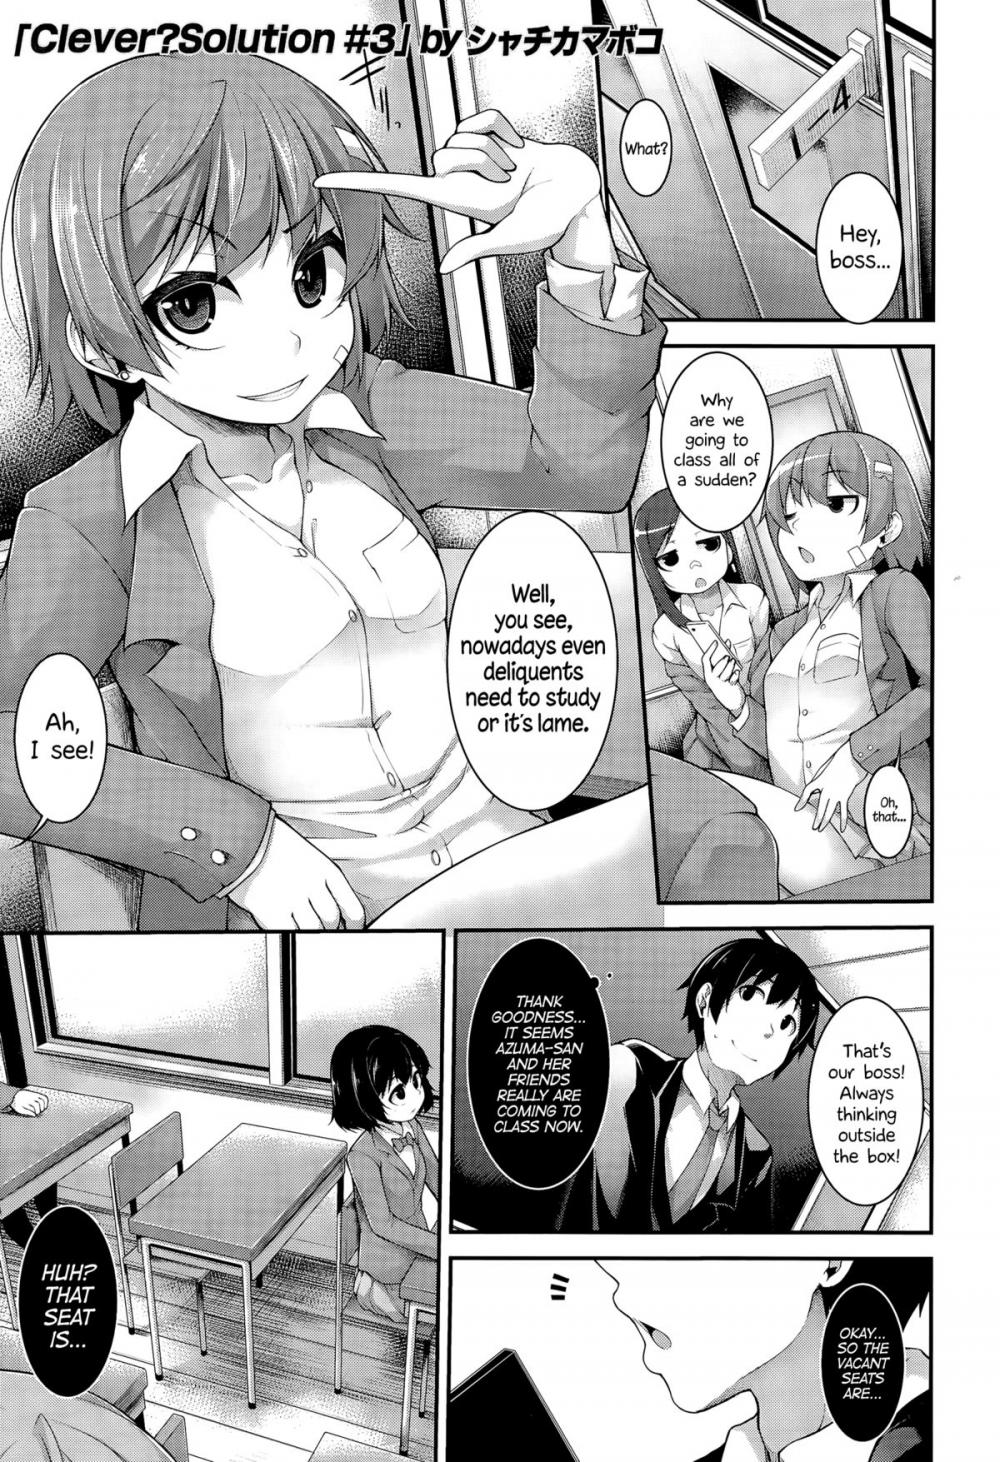 Hentai Manga Comic-Clever? Solution-Chapter 3-1